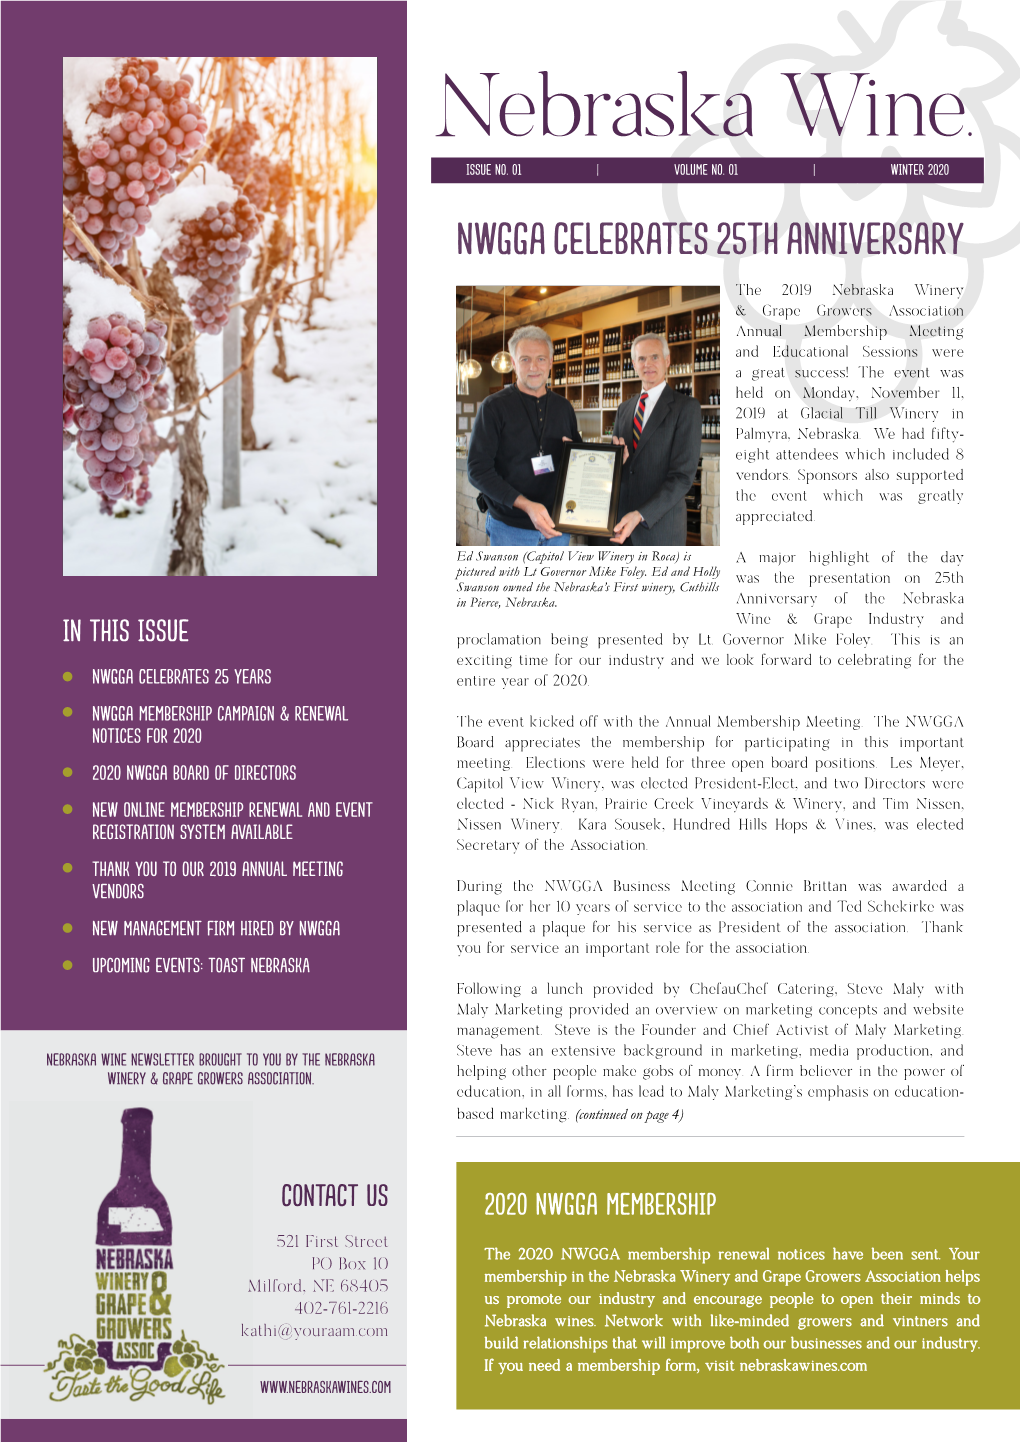 Nebraska Winery and Grape Growers Association Helps Milford, NE 68405 Us Promote Our Industry and Encourage People to Open Their Minds to 402-761-2216 Nebraska Wines